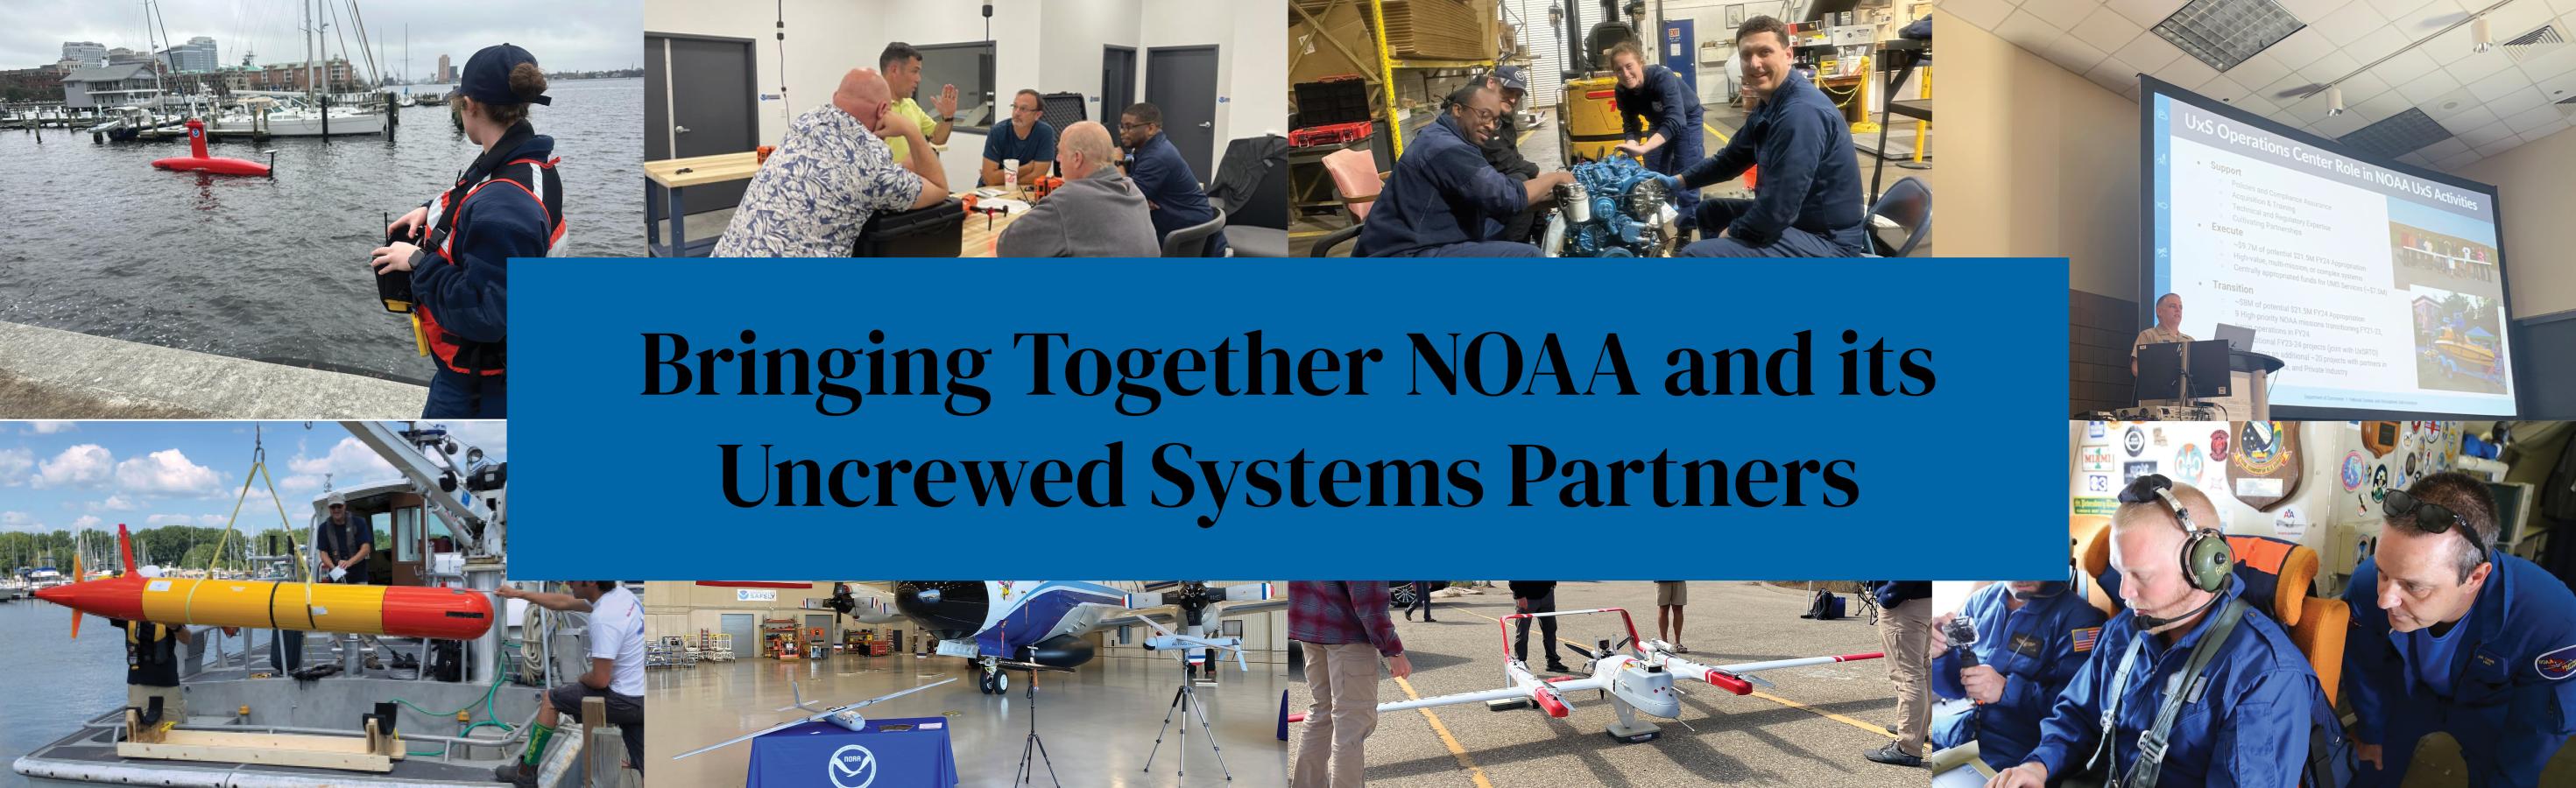 A collage of uncrewed systems platforms and operators in action with the words "Bringing Together NOAA and its Uncrewed Systems Partners"